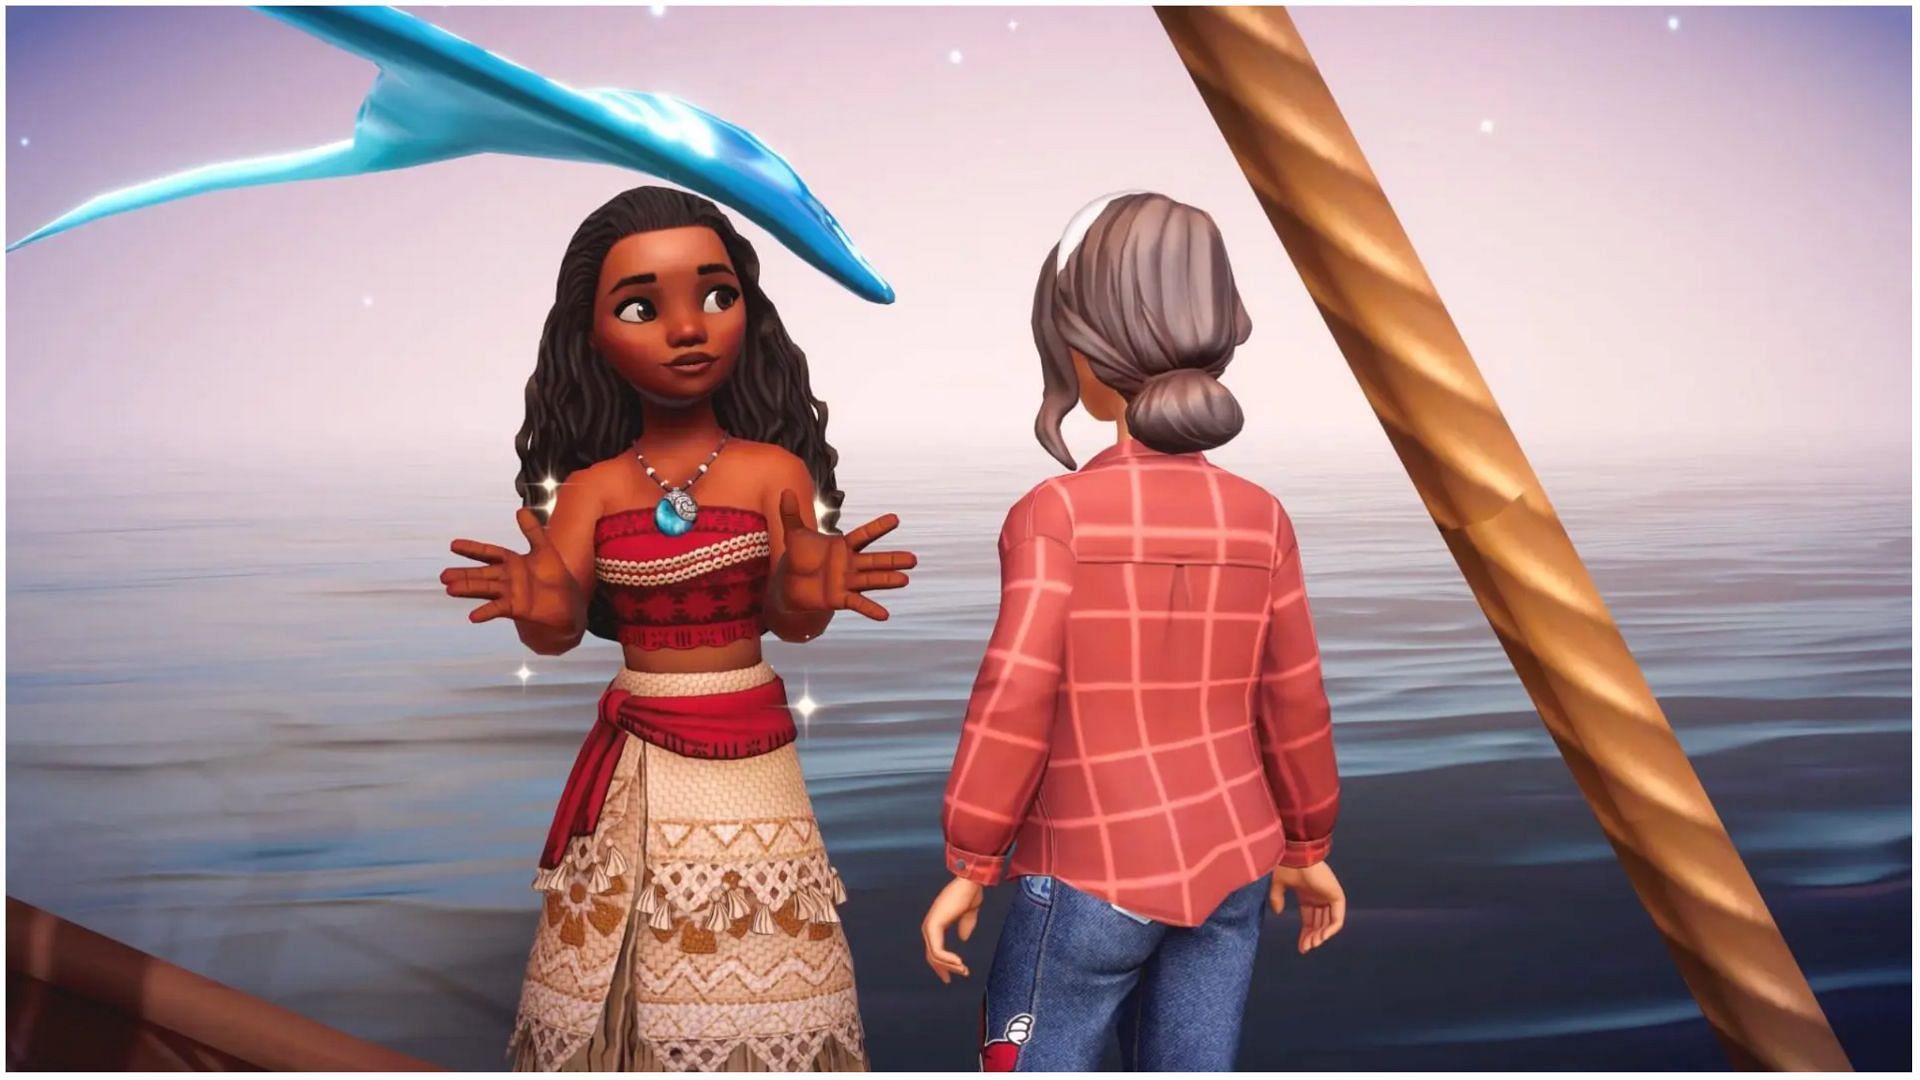 Moana can help you get free fish in Disney Dreamlight Valley (Image via Gameloft)